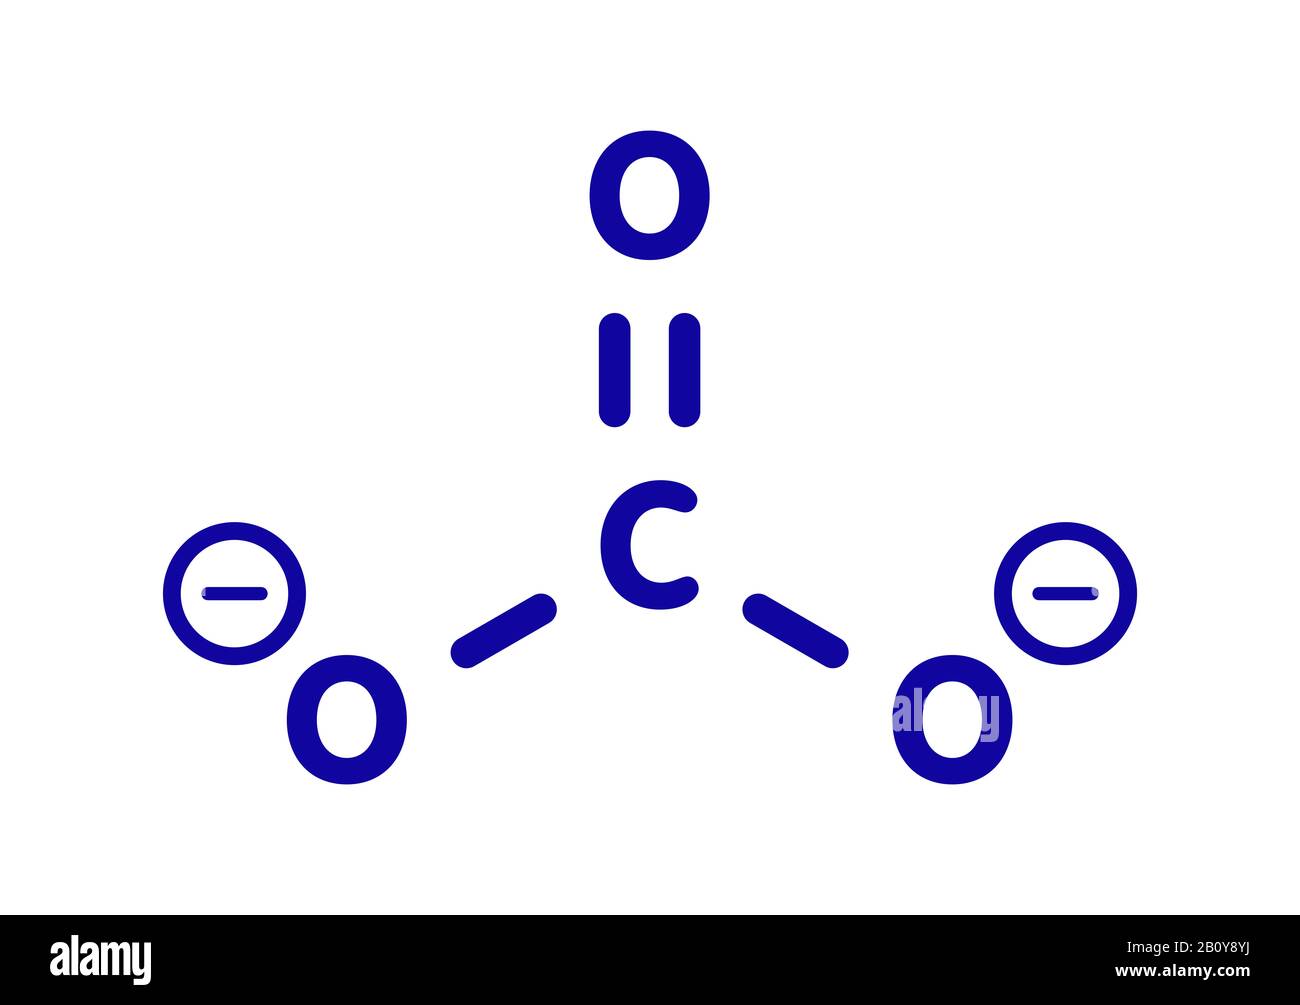 Carbonate anion chemical structure, illustration Stock Photo